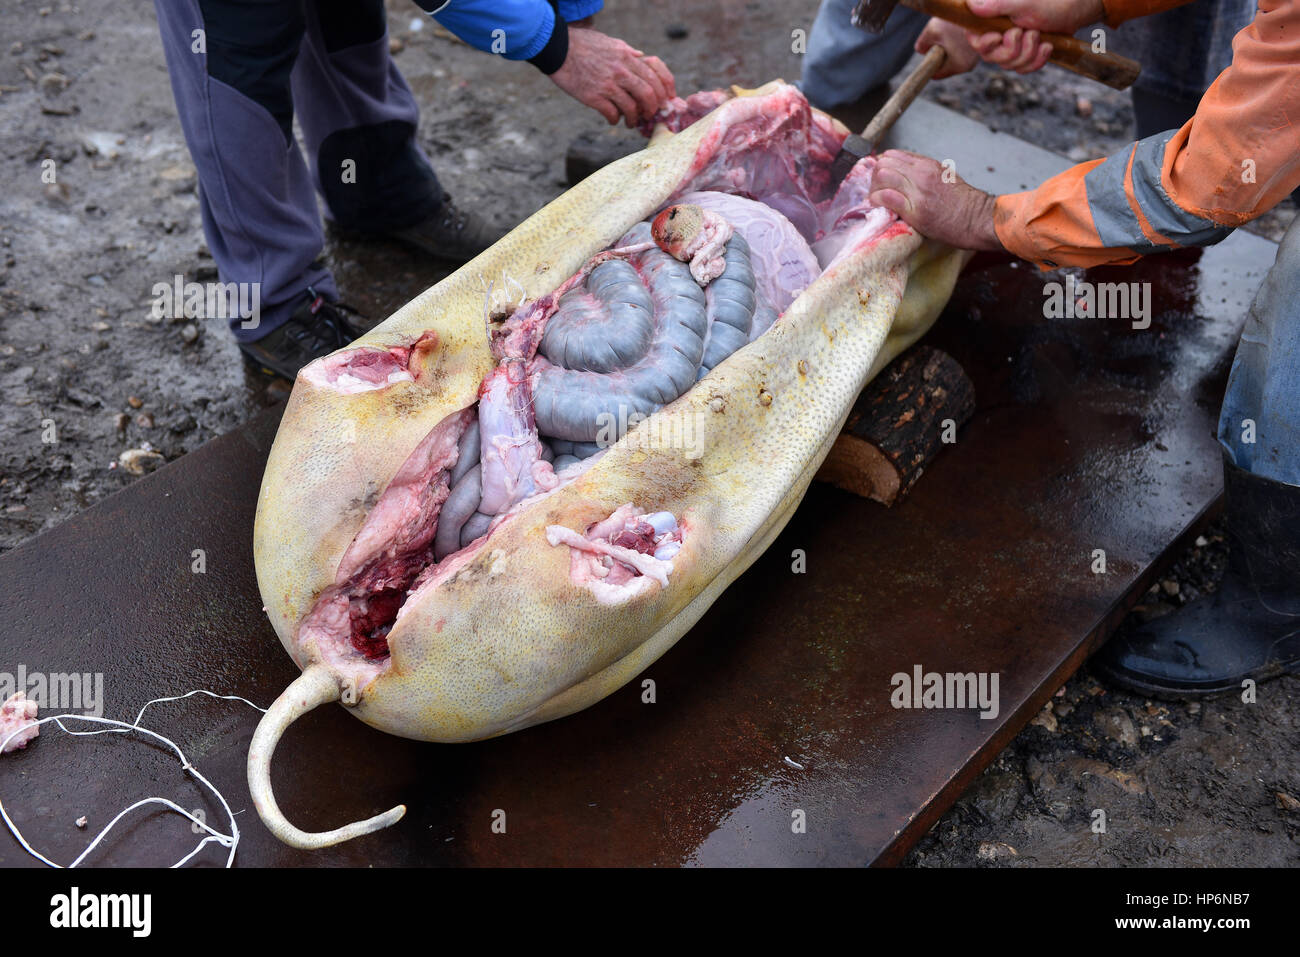 Evisceration. Slaughter cutting off the chitterlings of a pig Stock Photo -  Alamy